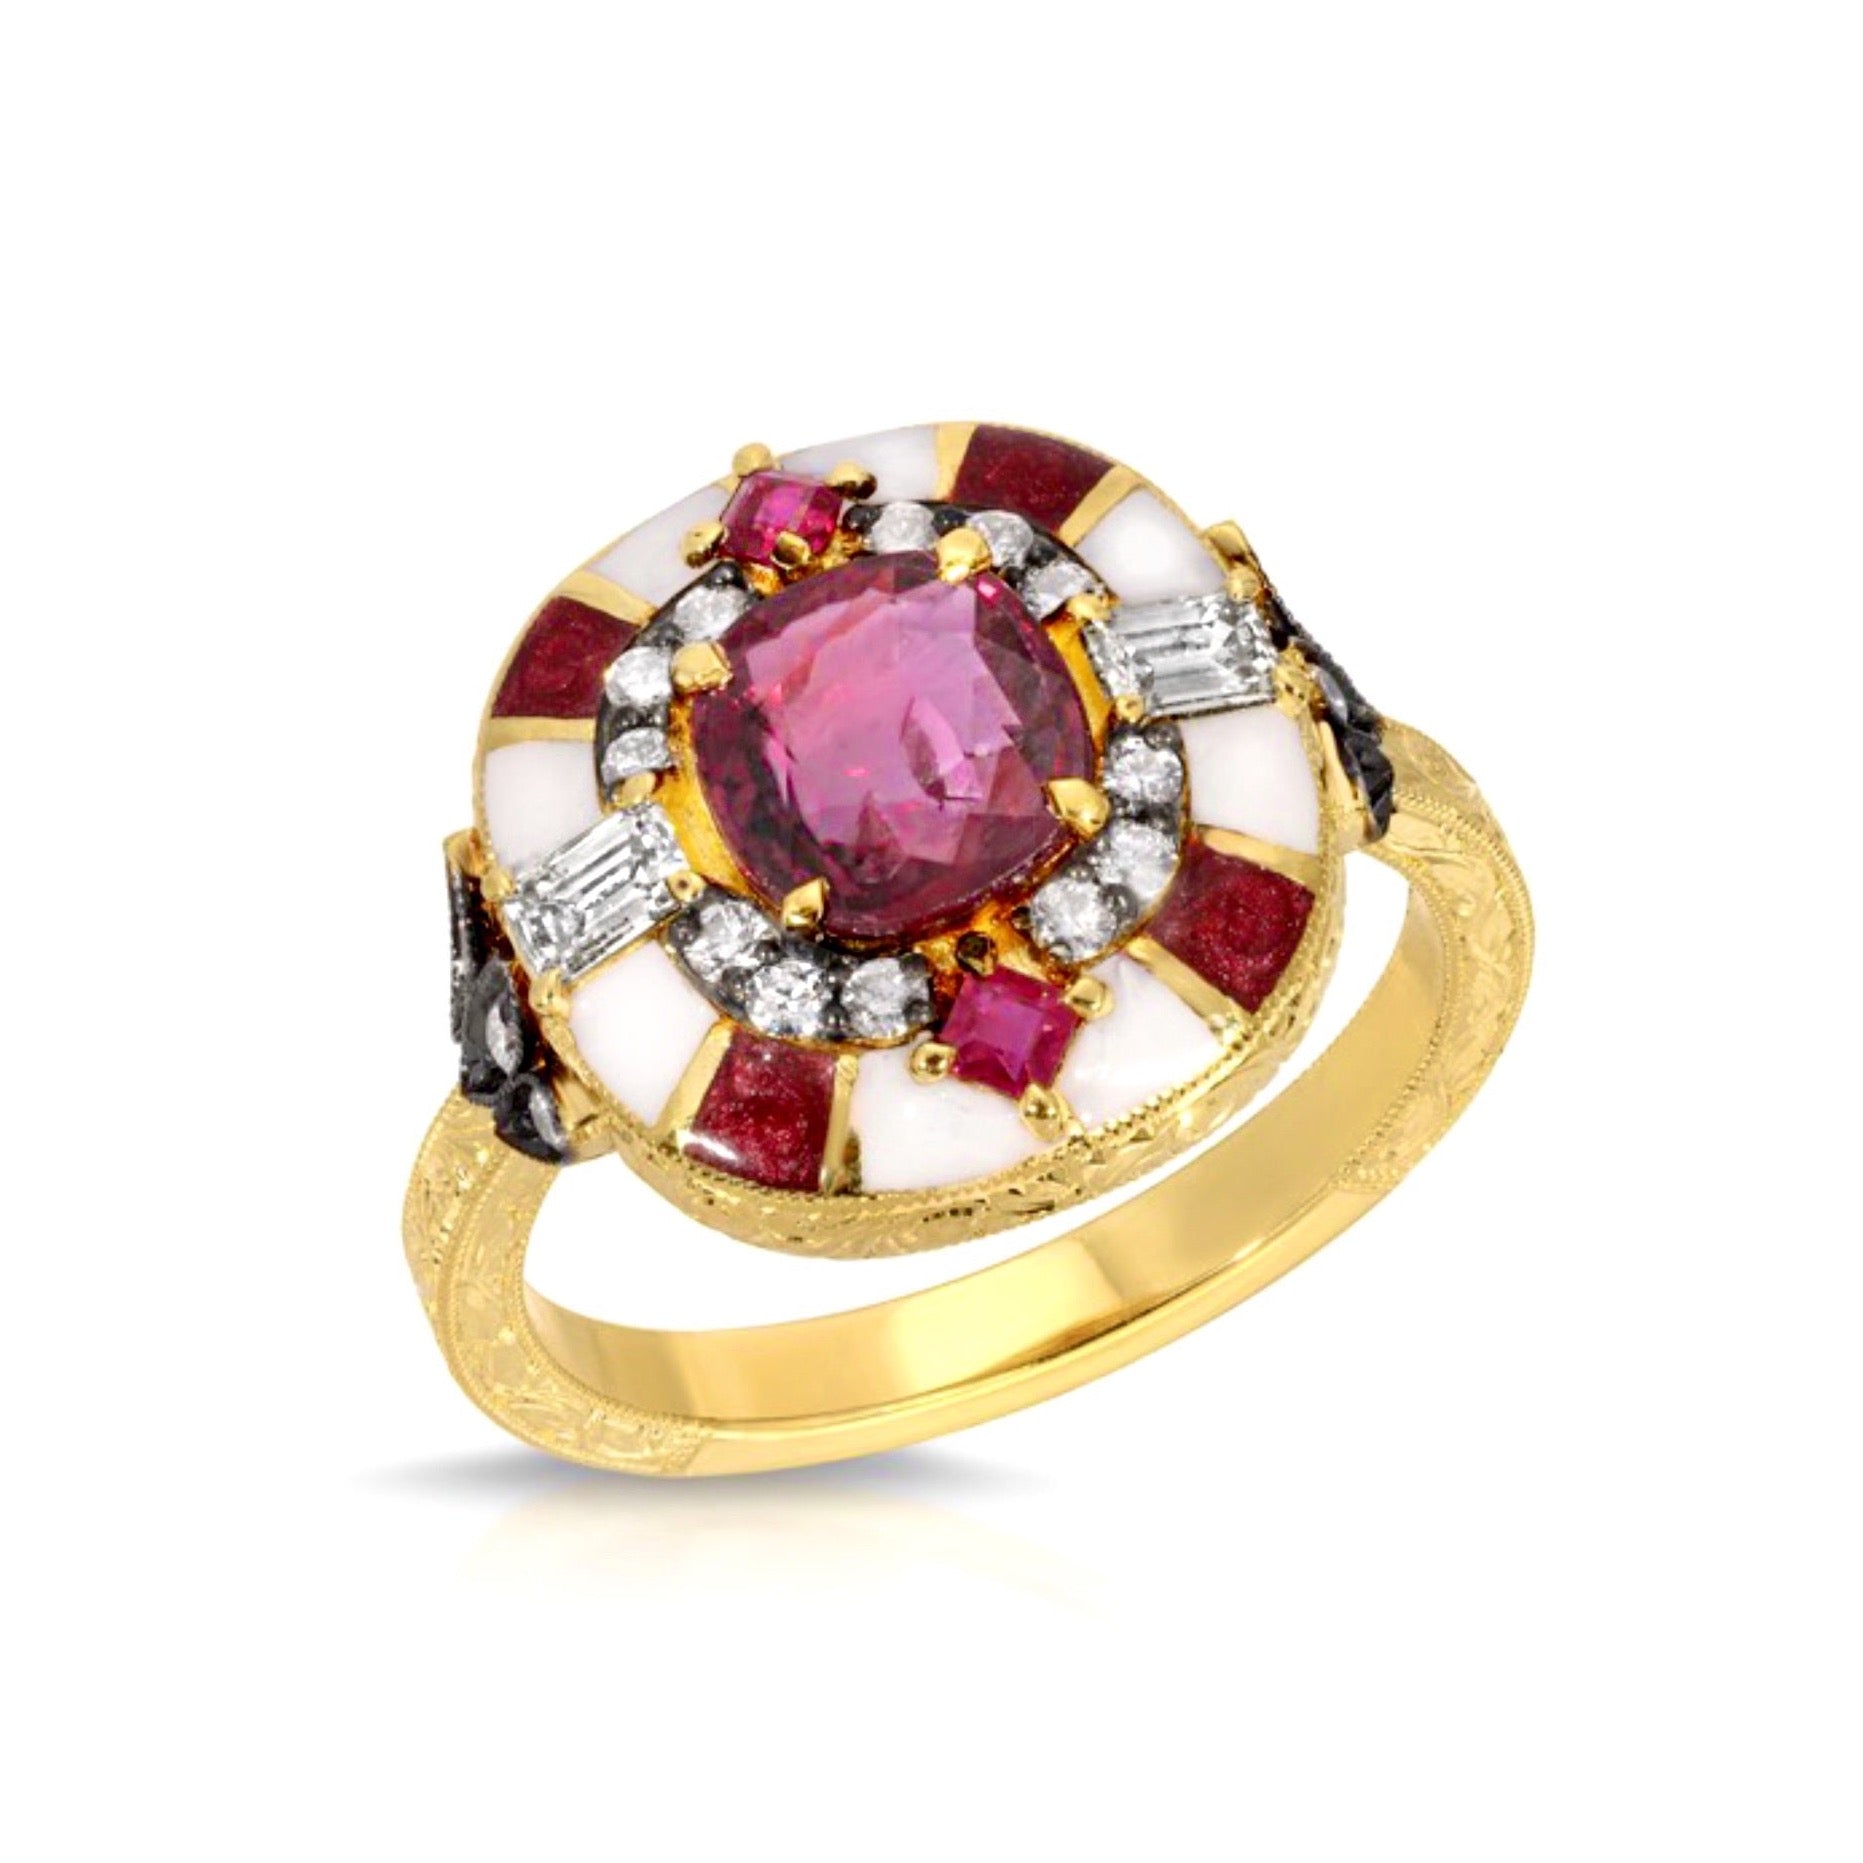 Ruby & Diamond Enamel Ring by Lord Jewelry available at Talisman Collection Fine Jewelers in El Dorado Hills, CA and online. Get ready to turn heads with our Ruby & Diamond Enamel Ring. This regal cocktail ring features a striking cushion-cut ruby in the center, surrounded by sparkling baguette diamonds and a touch of enamel, all set in 18k yellow gold. It's the perfect blend of sophistication and style, designed to make a statement without saying a word. 